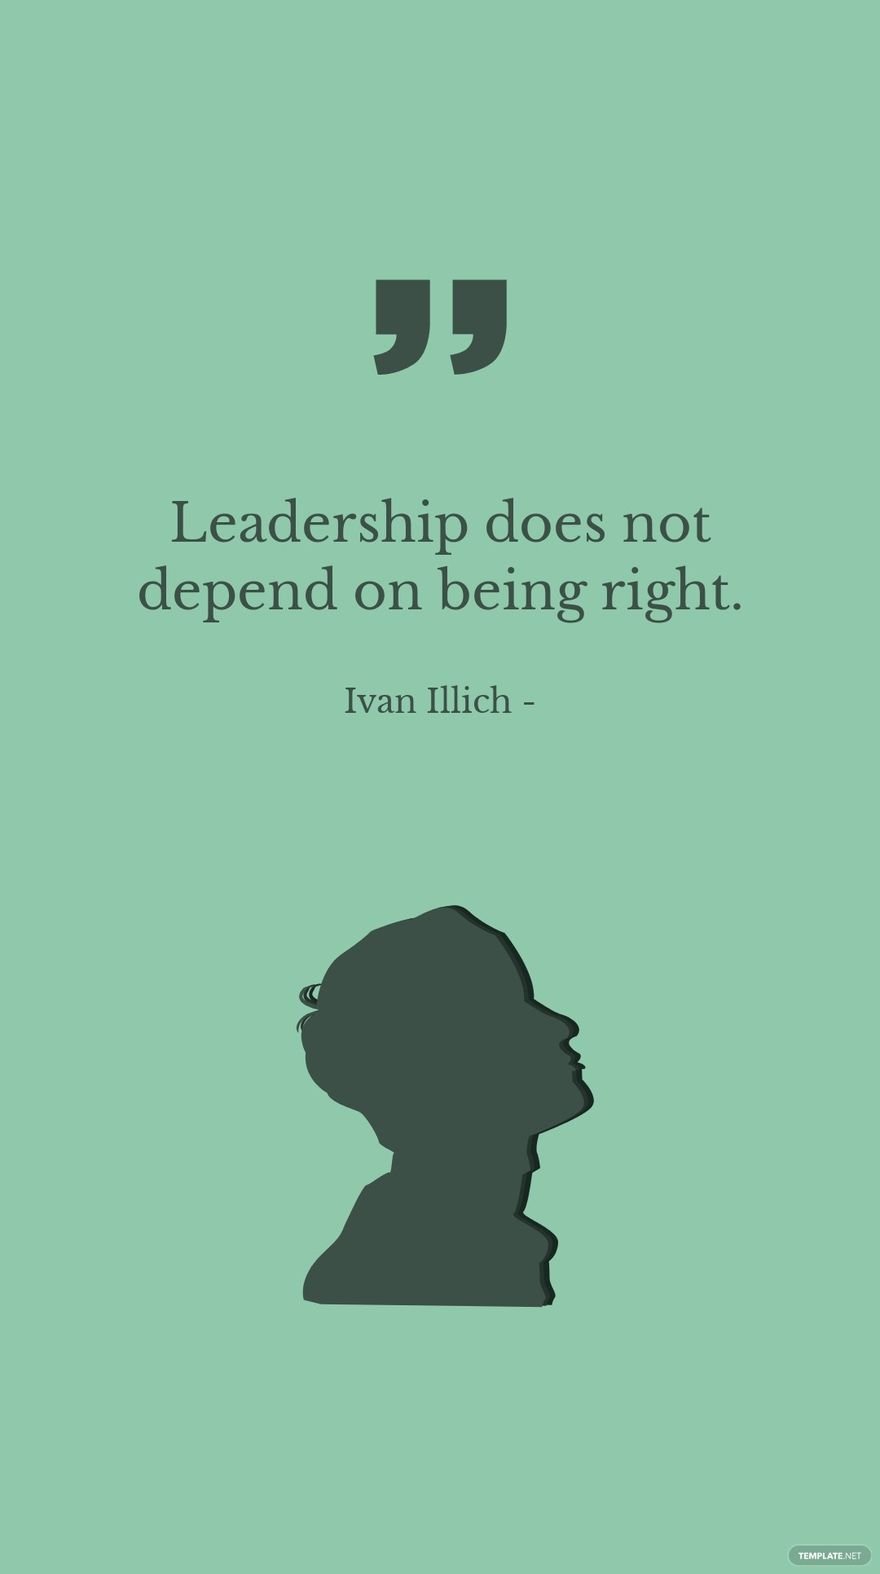 Free Ivan Illich - Leadership does not depend on being right.